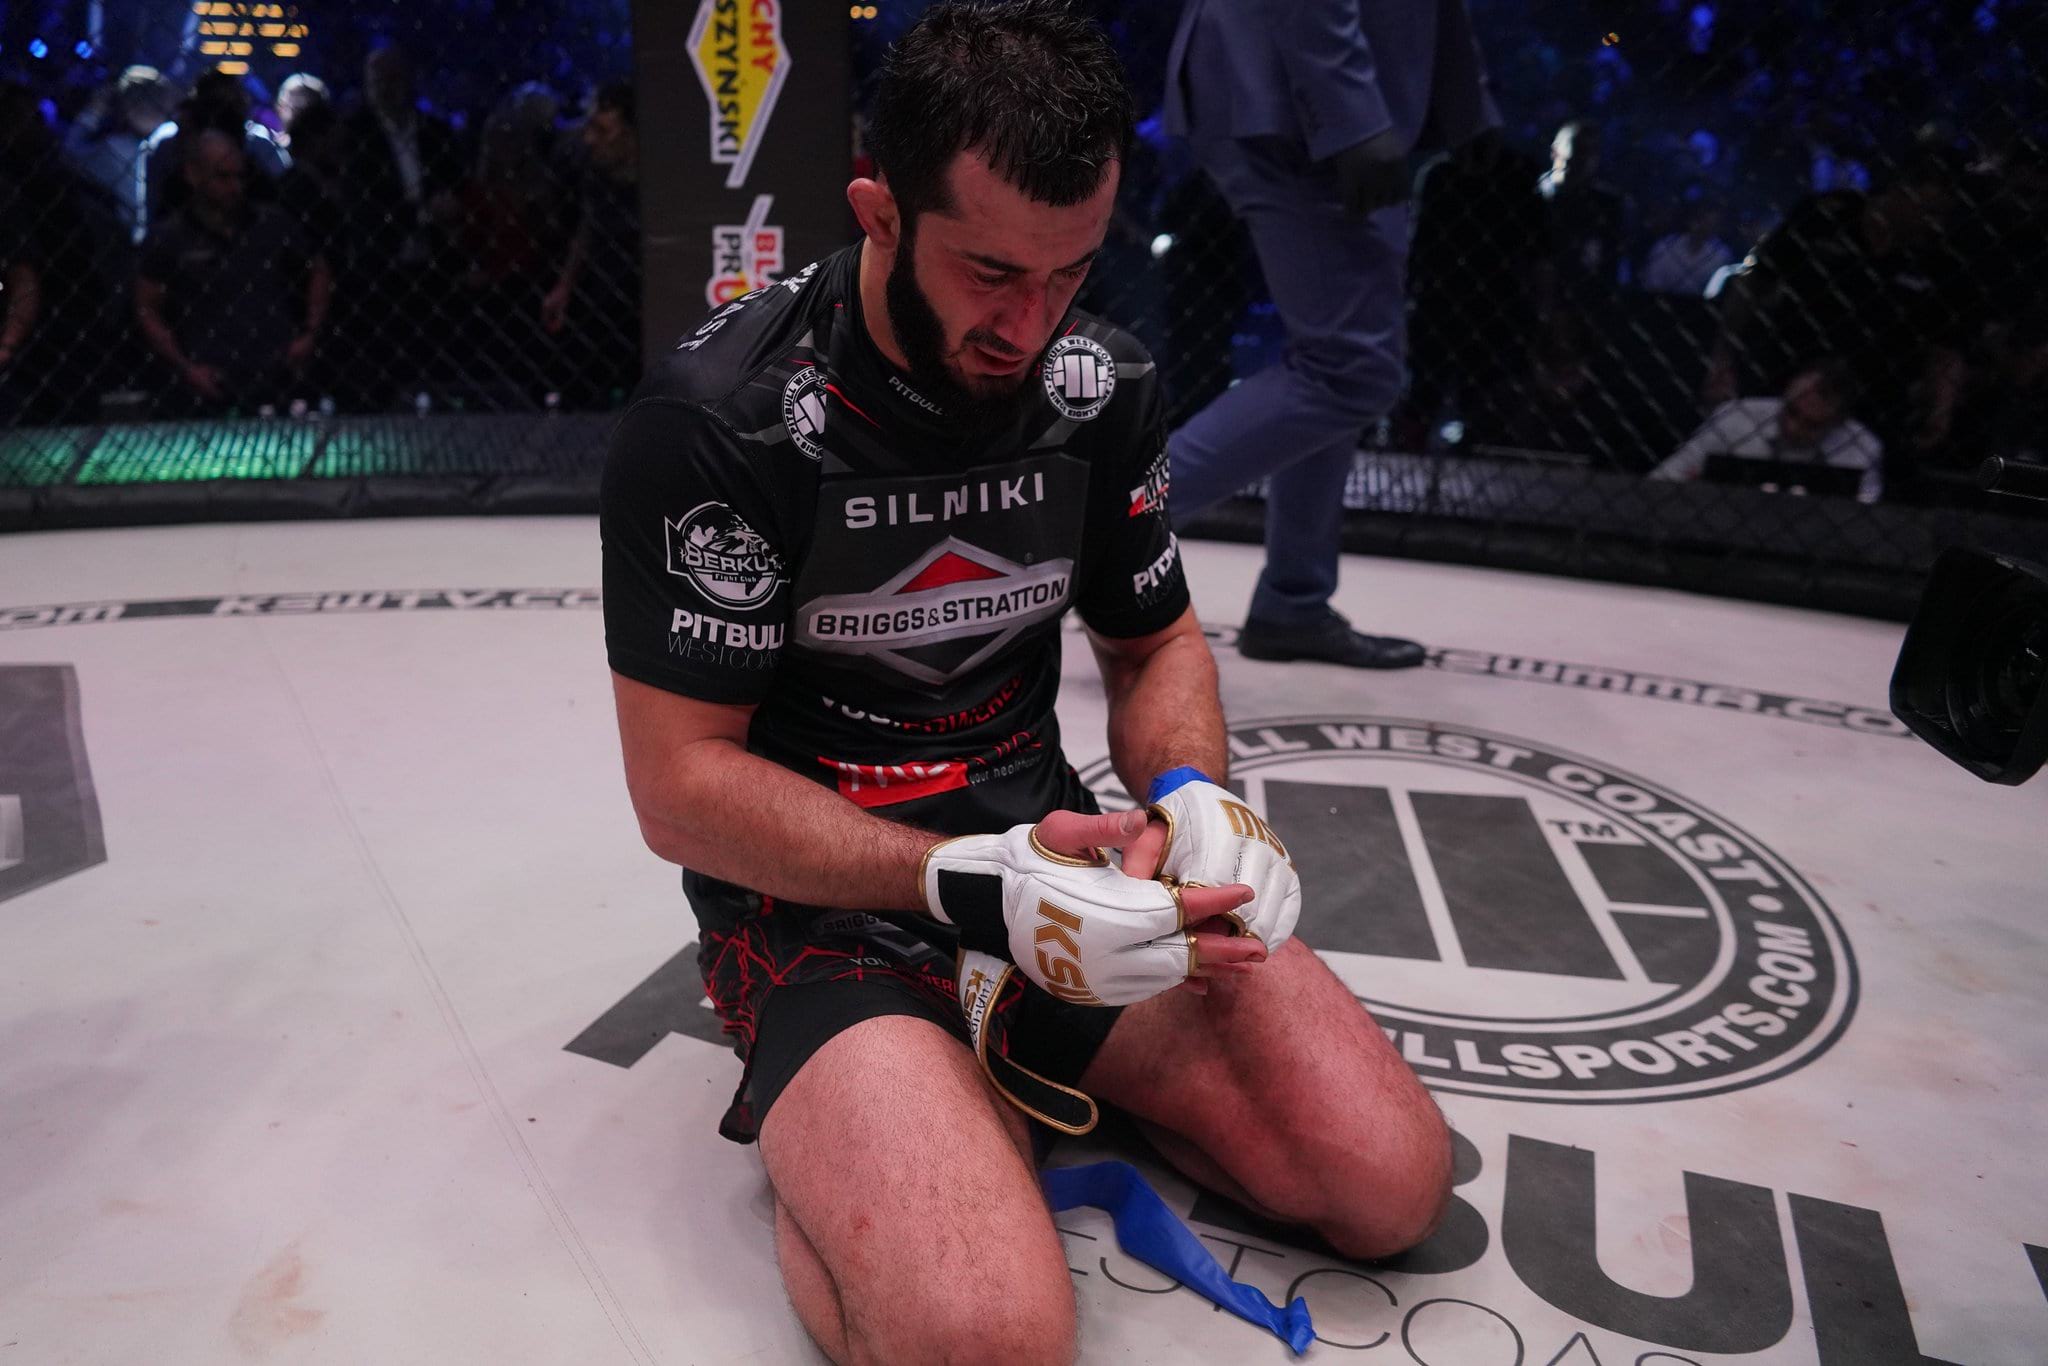 KSW legend Mamed Khalidov retires from MMA following rematch defeat to Tomasz Narkun at KSW 46 - image via KSW